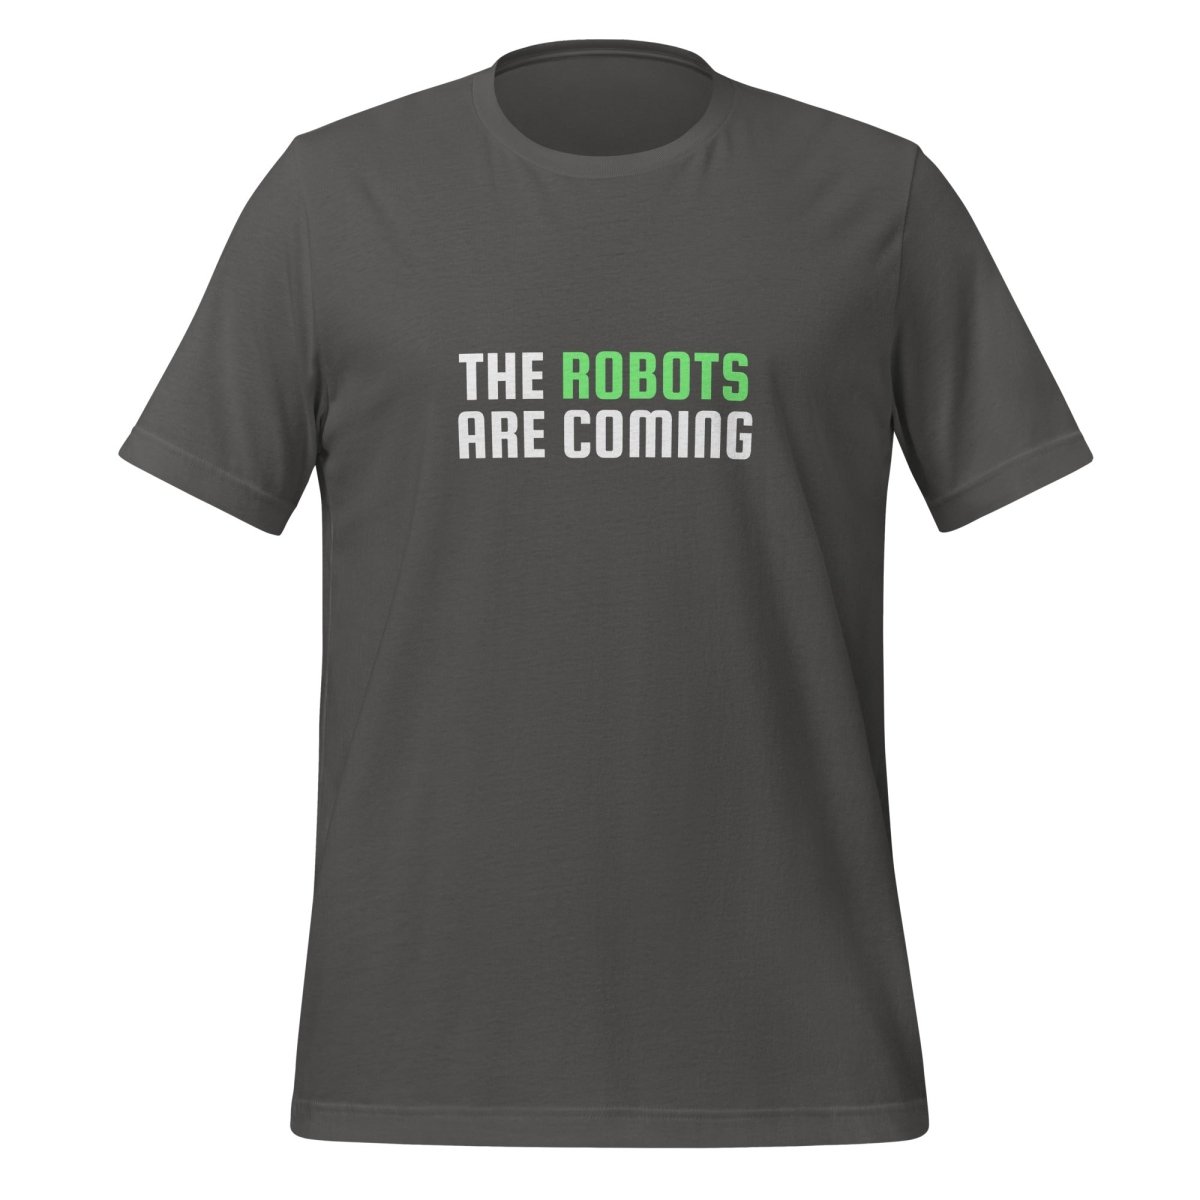 The Robots Are Coming (Green) T - Shirt 2 (unisex) - Asphalt - AI Store